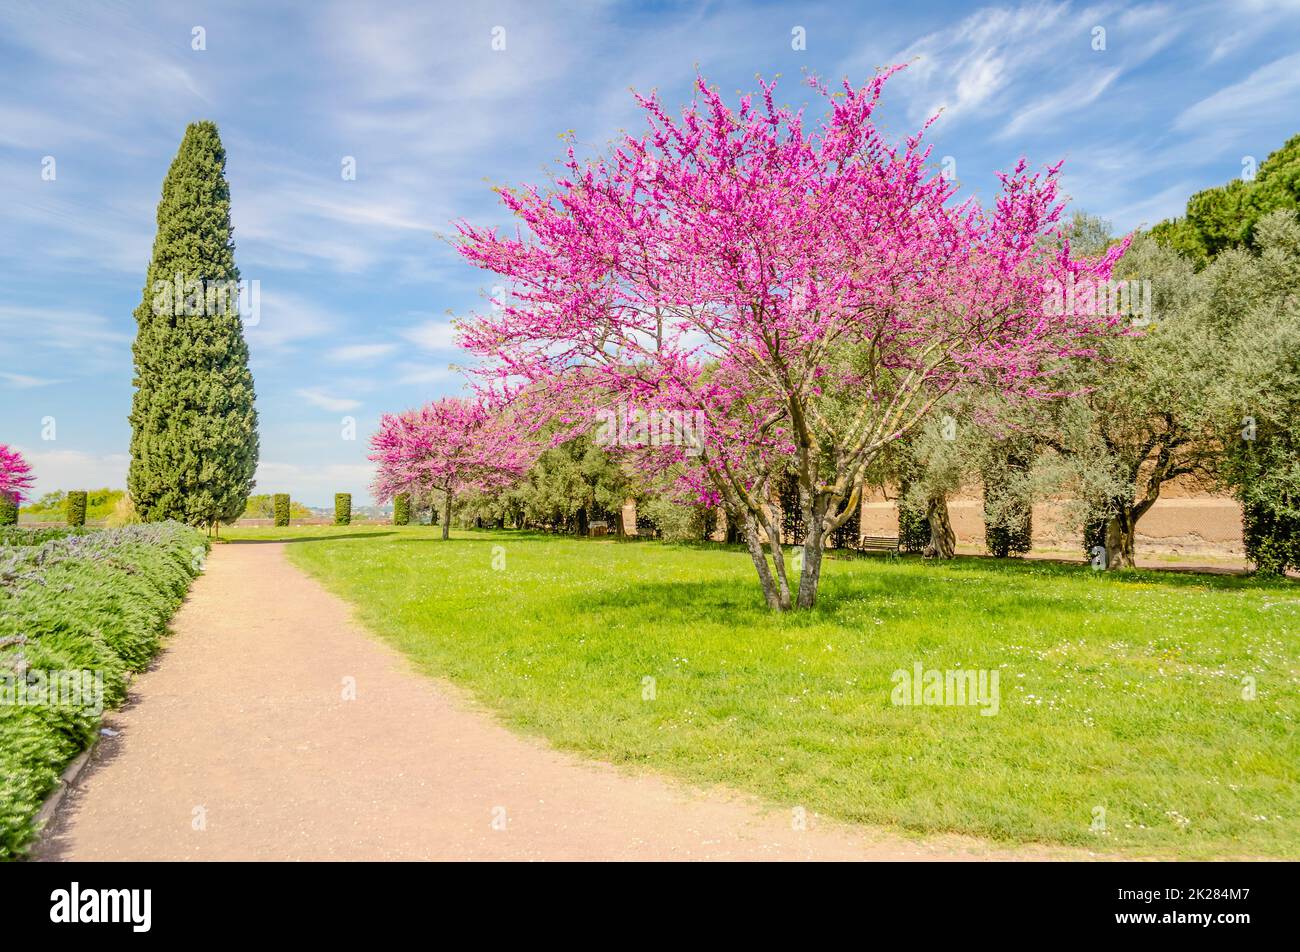 Beautiful garden with flowered cherry trees, cypresses and olive trees Stock Photo